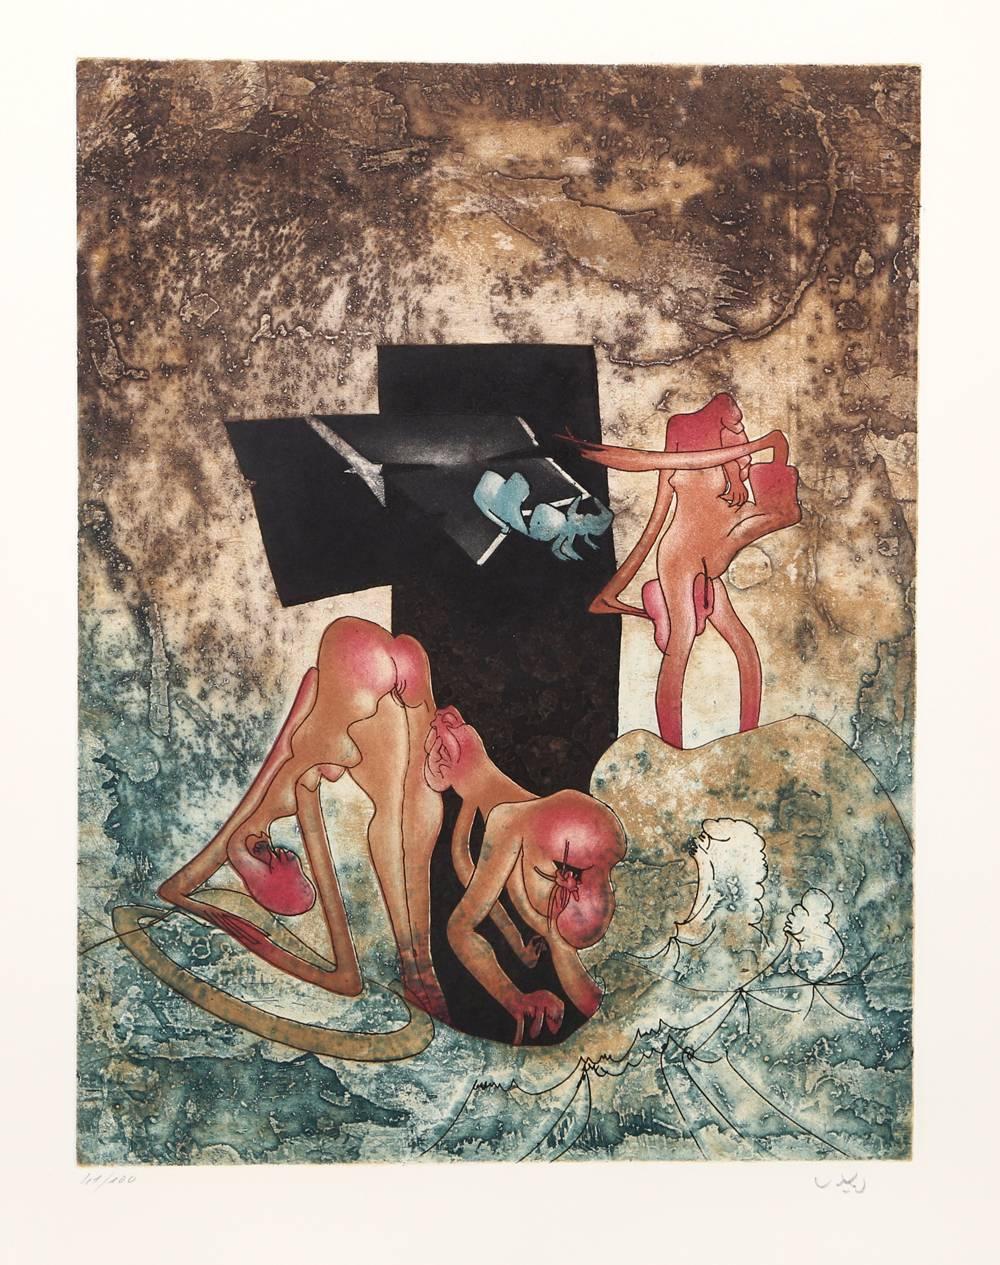 Artist: Roberto Matta, Chilean (1911 - 2002)
Title: La Danse de la Mort - Planche 1-8
Year: 1972
Medium: Suite of 8 Aquatint Etchings, Each Signed and numbered in pencil
Edition: 41/100
Image Size: 20.75 x 15.25 inches
Size: 26 in. x 20 in. (66.04